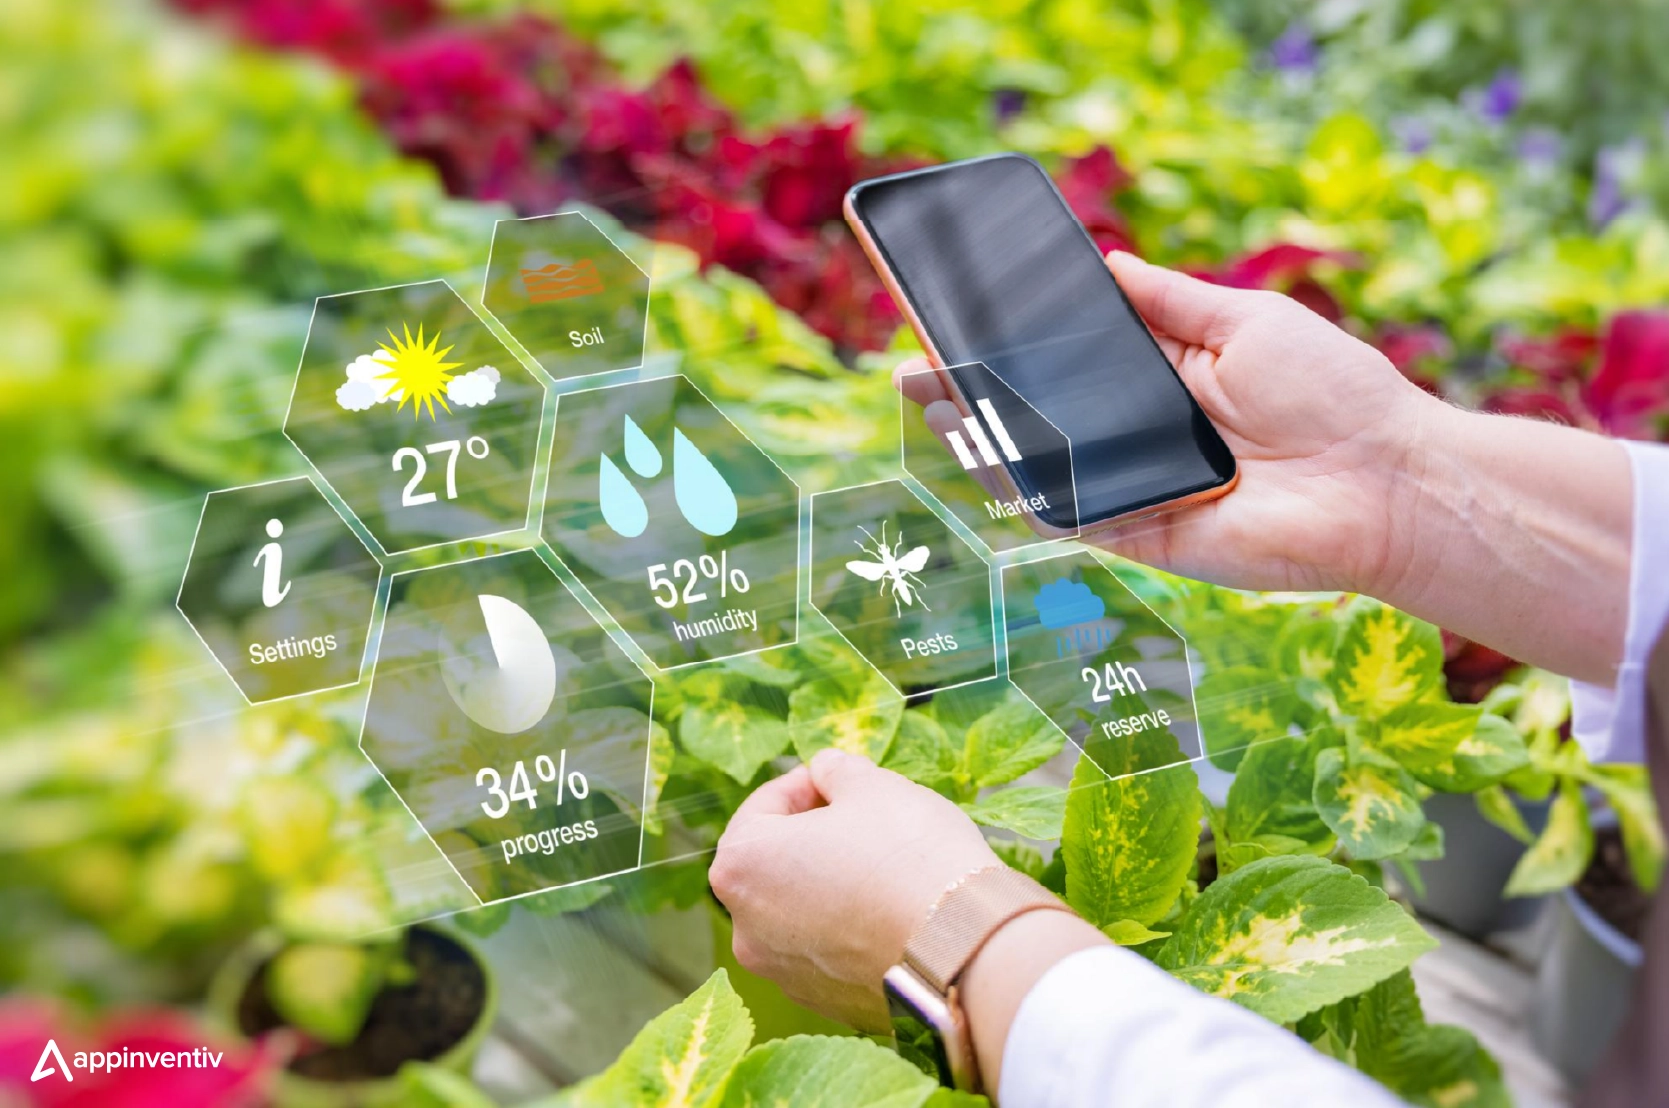 NB-IoT in smart agriculture